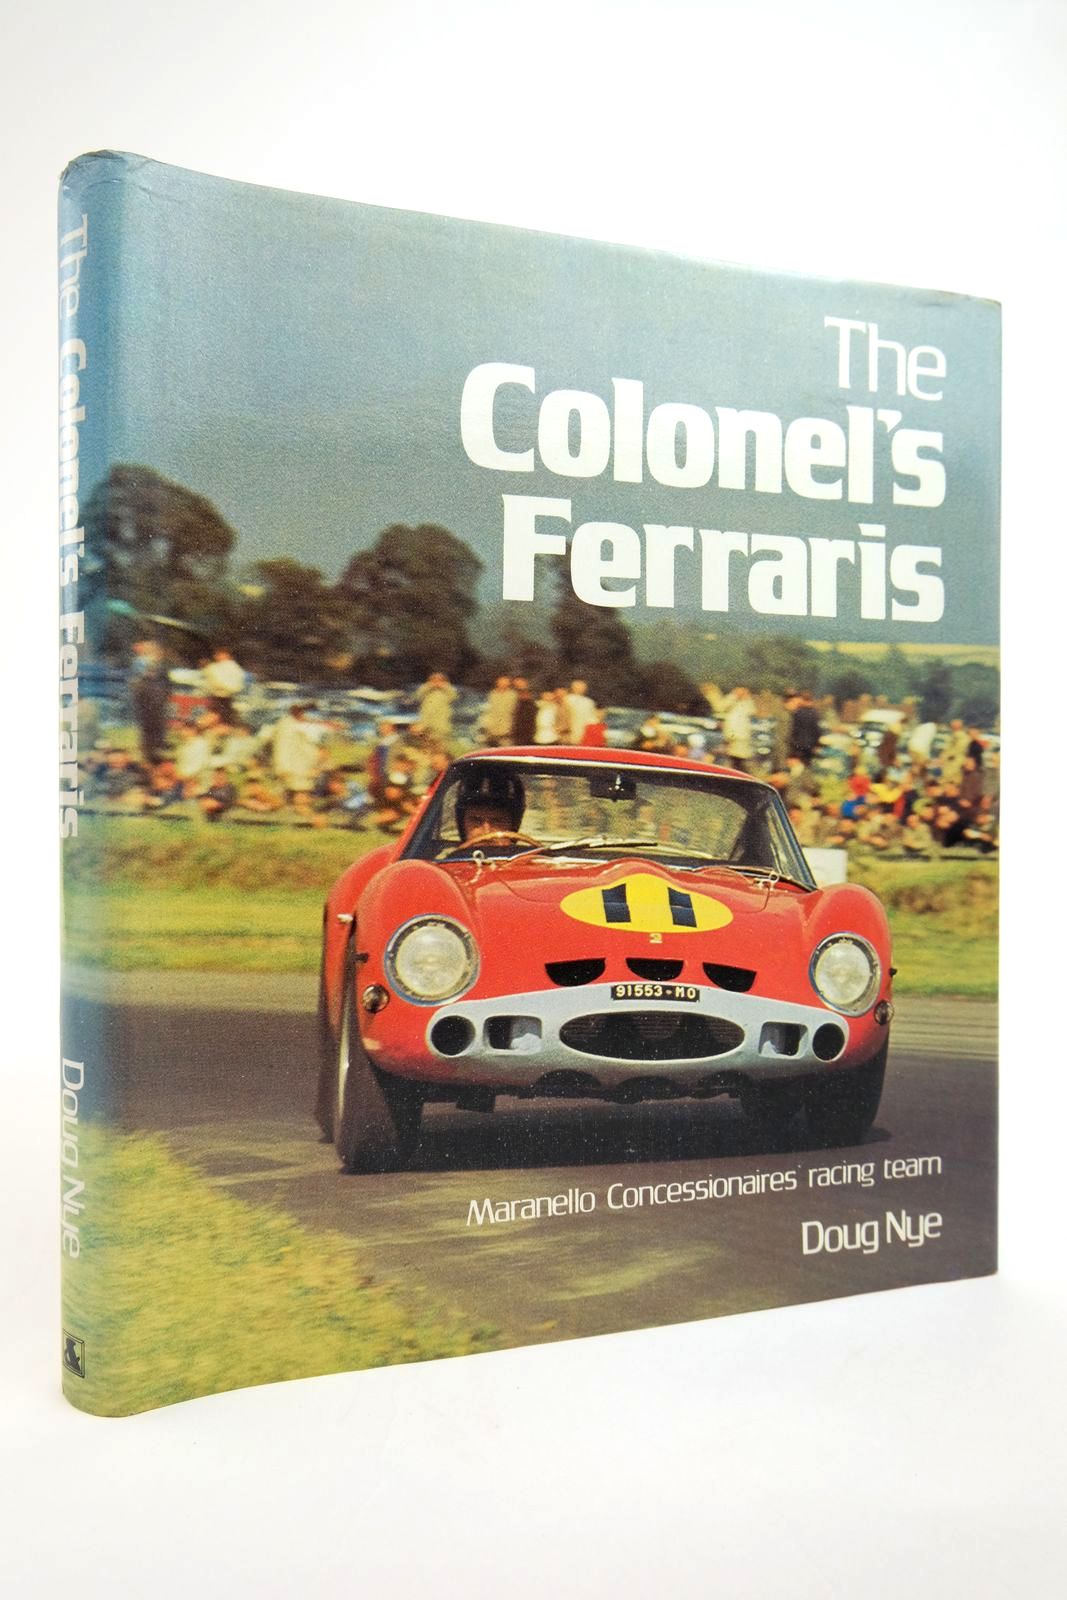 Photo of THE COLONEL'S FERRARIS: MARANELLO CONCESSIONAIRES' RACING TEAM written by Nye, Doug published by Ampersand Press (STOCK CODE: 2134987)  for sale by Stella & Rose's Books